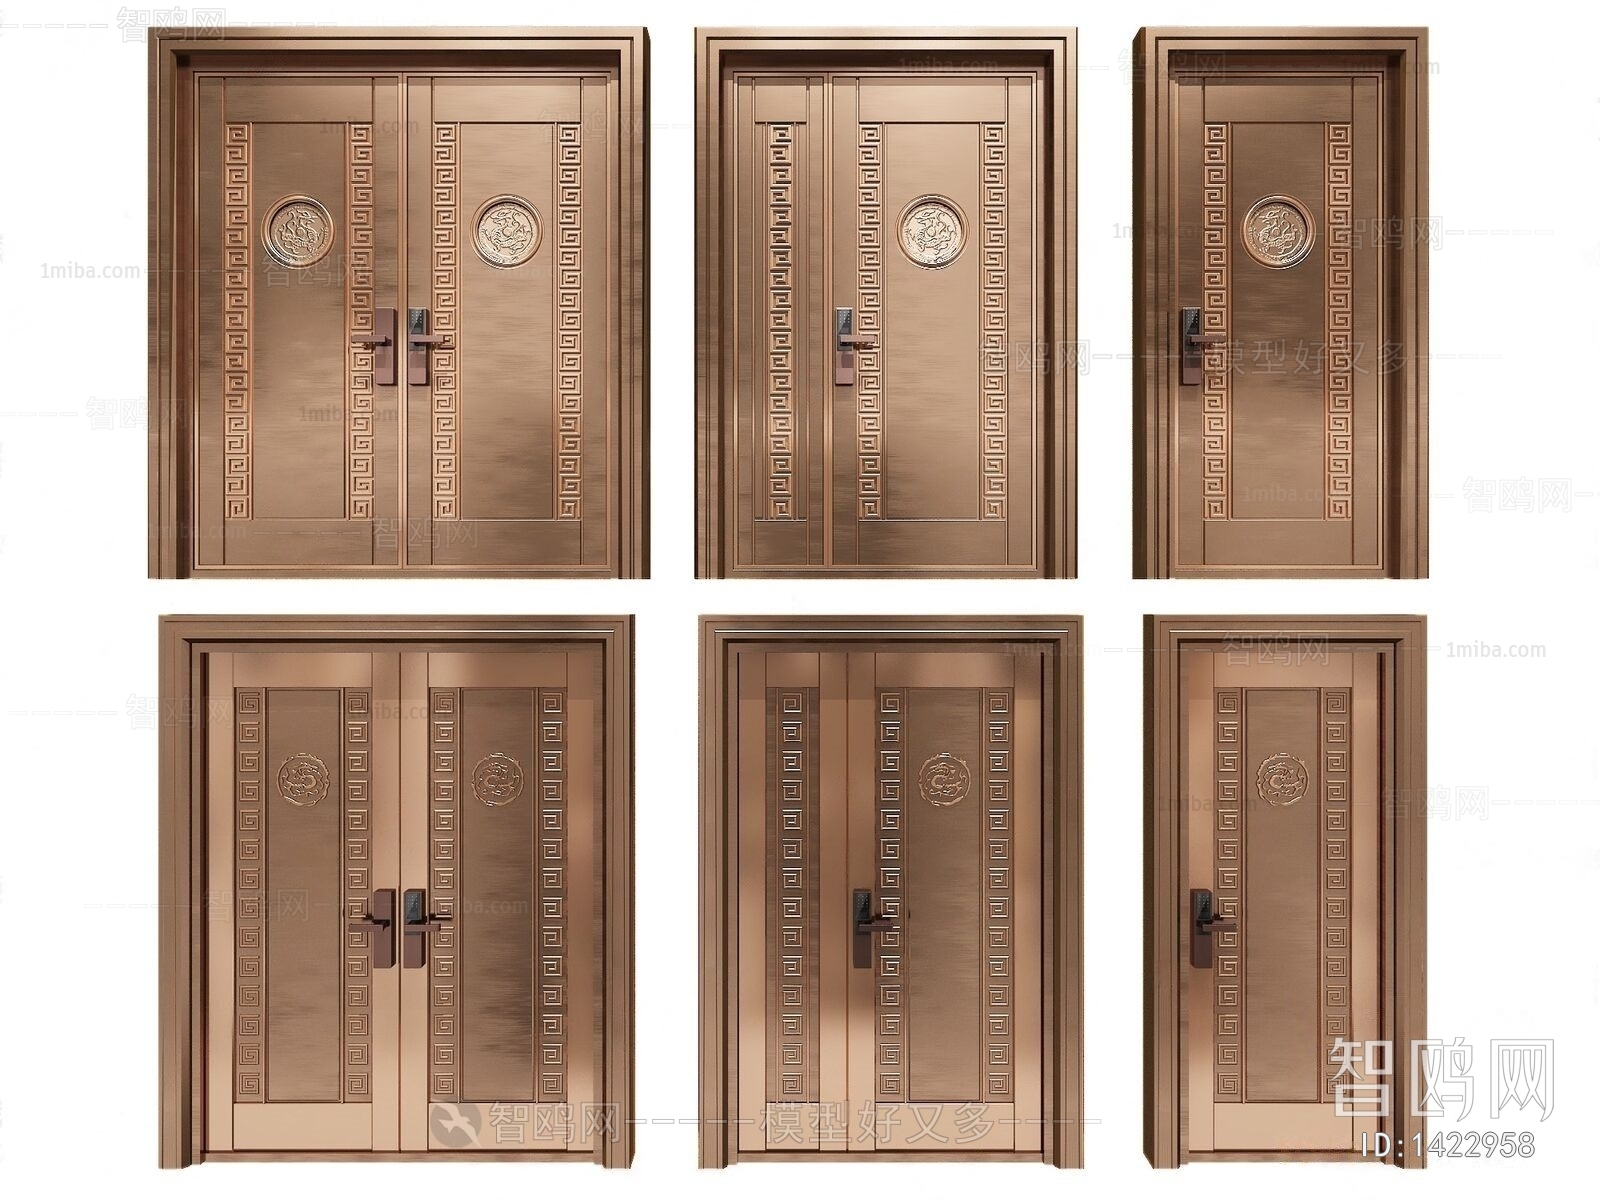 New Chinese Style Unequal Double Door